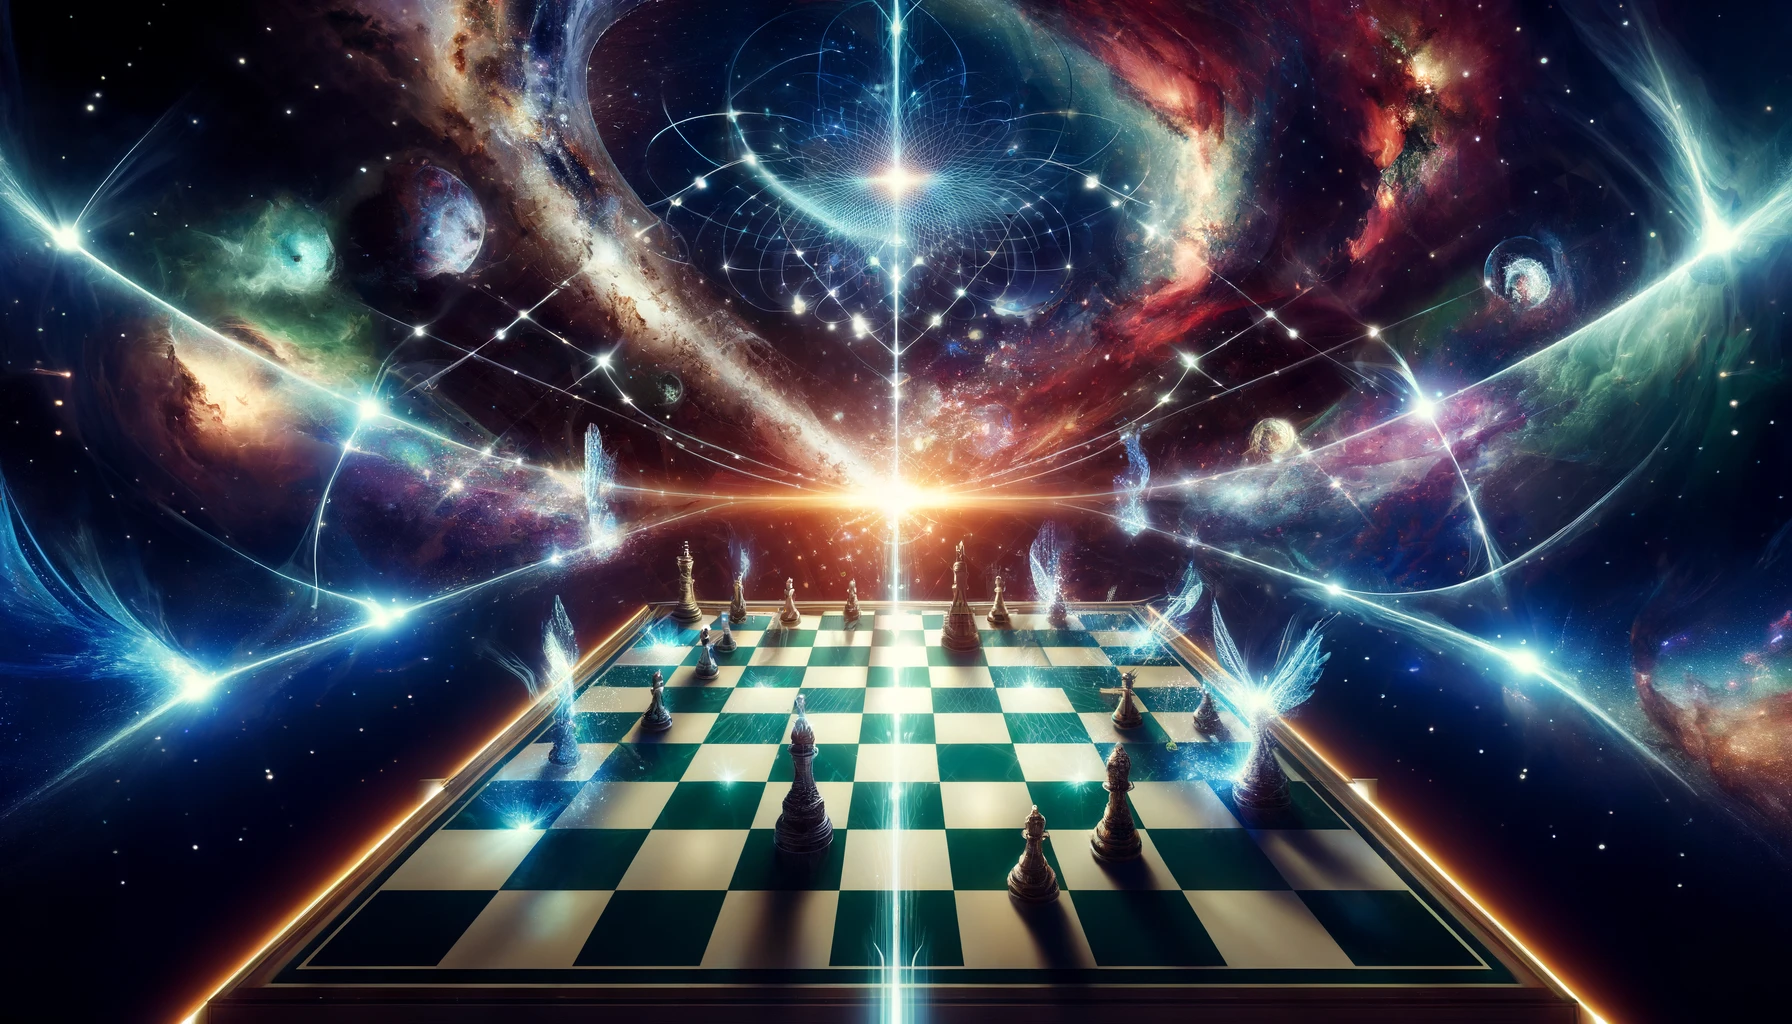 A grand cosmic chessboard extends into the universe, symbolizing strategic mastery in Marvel Snap. The board is illuminated by ethereal lights and surrounded by vibrant celestial bodies, reflecting the complex and dynamic nature of game strategy following the latest balance update.